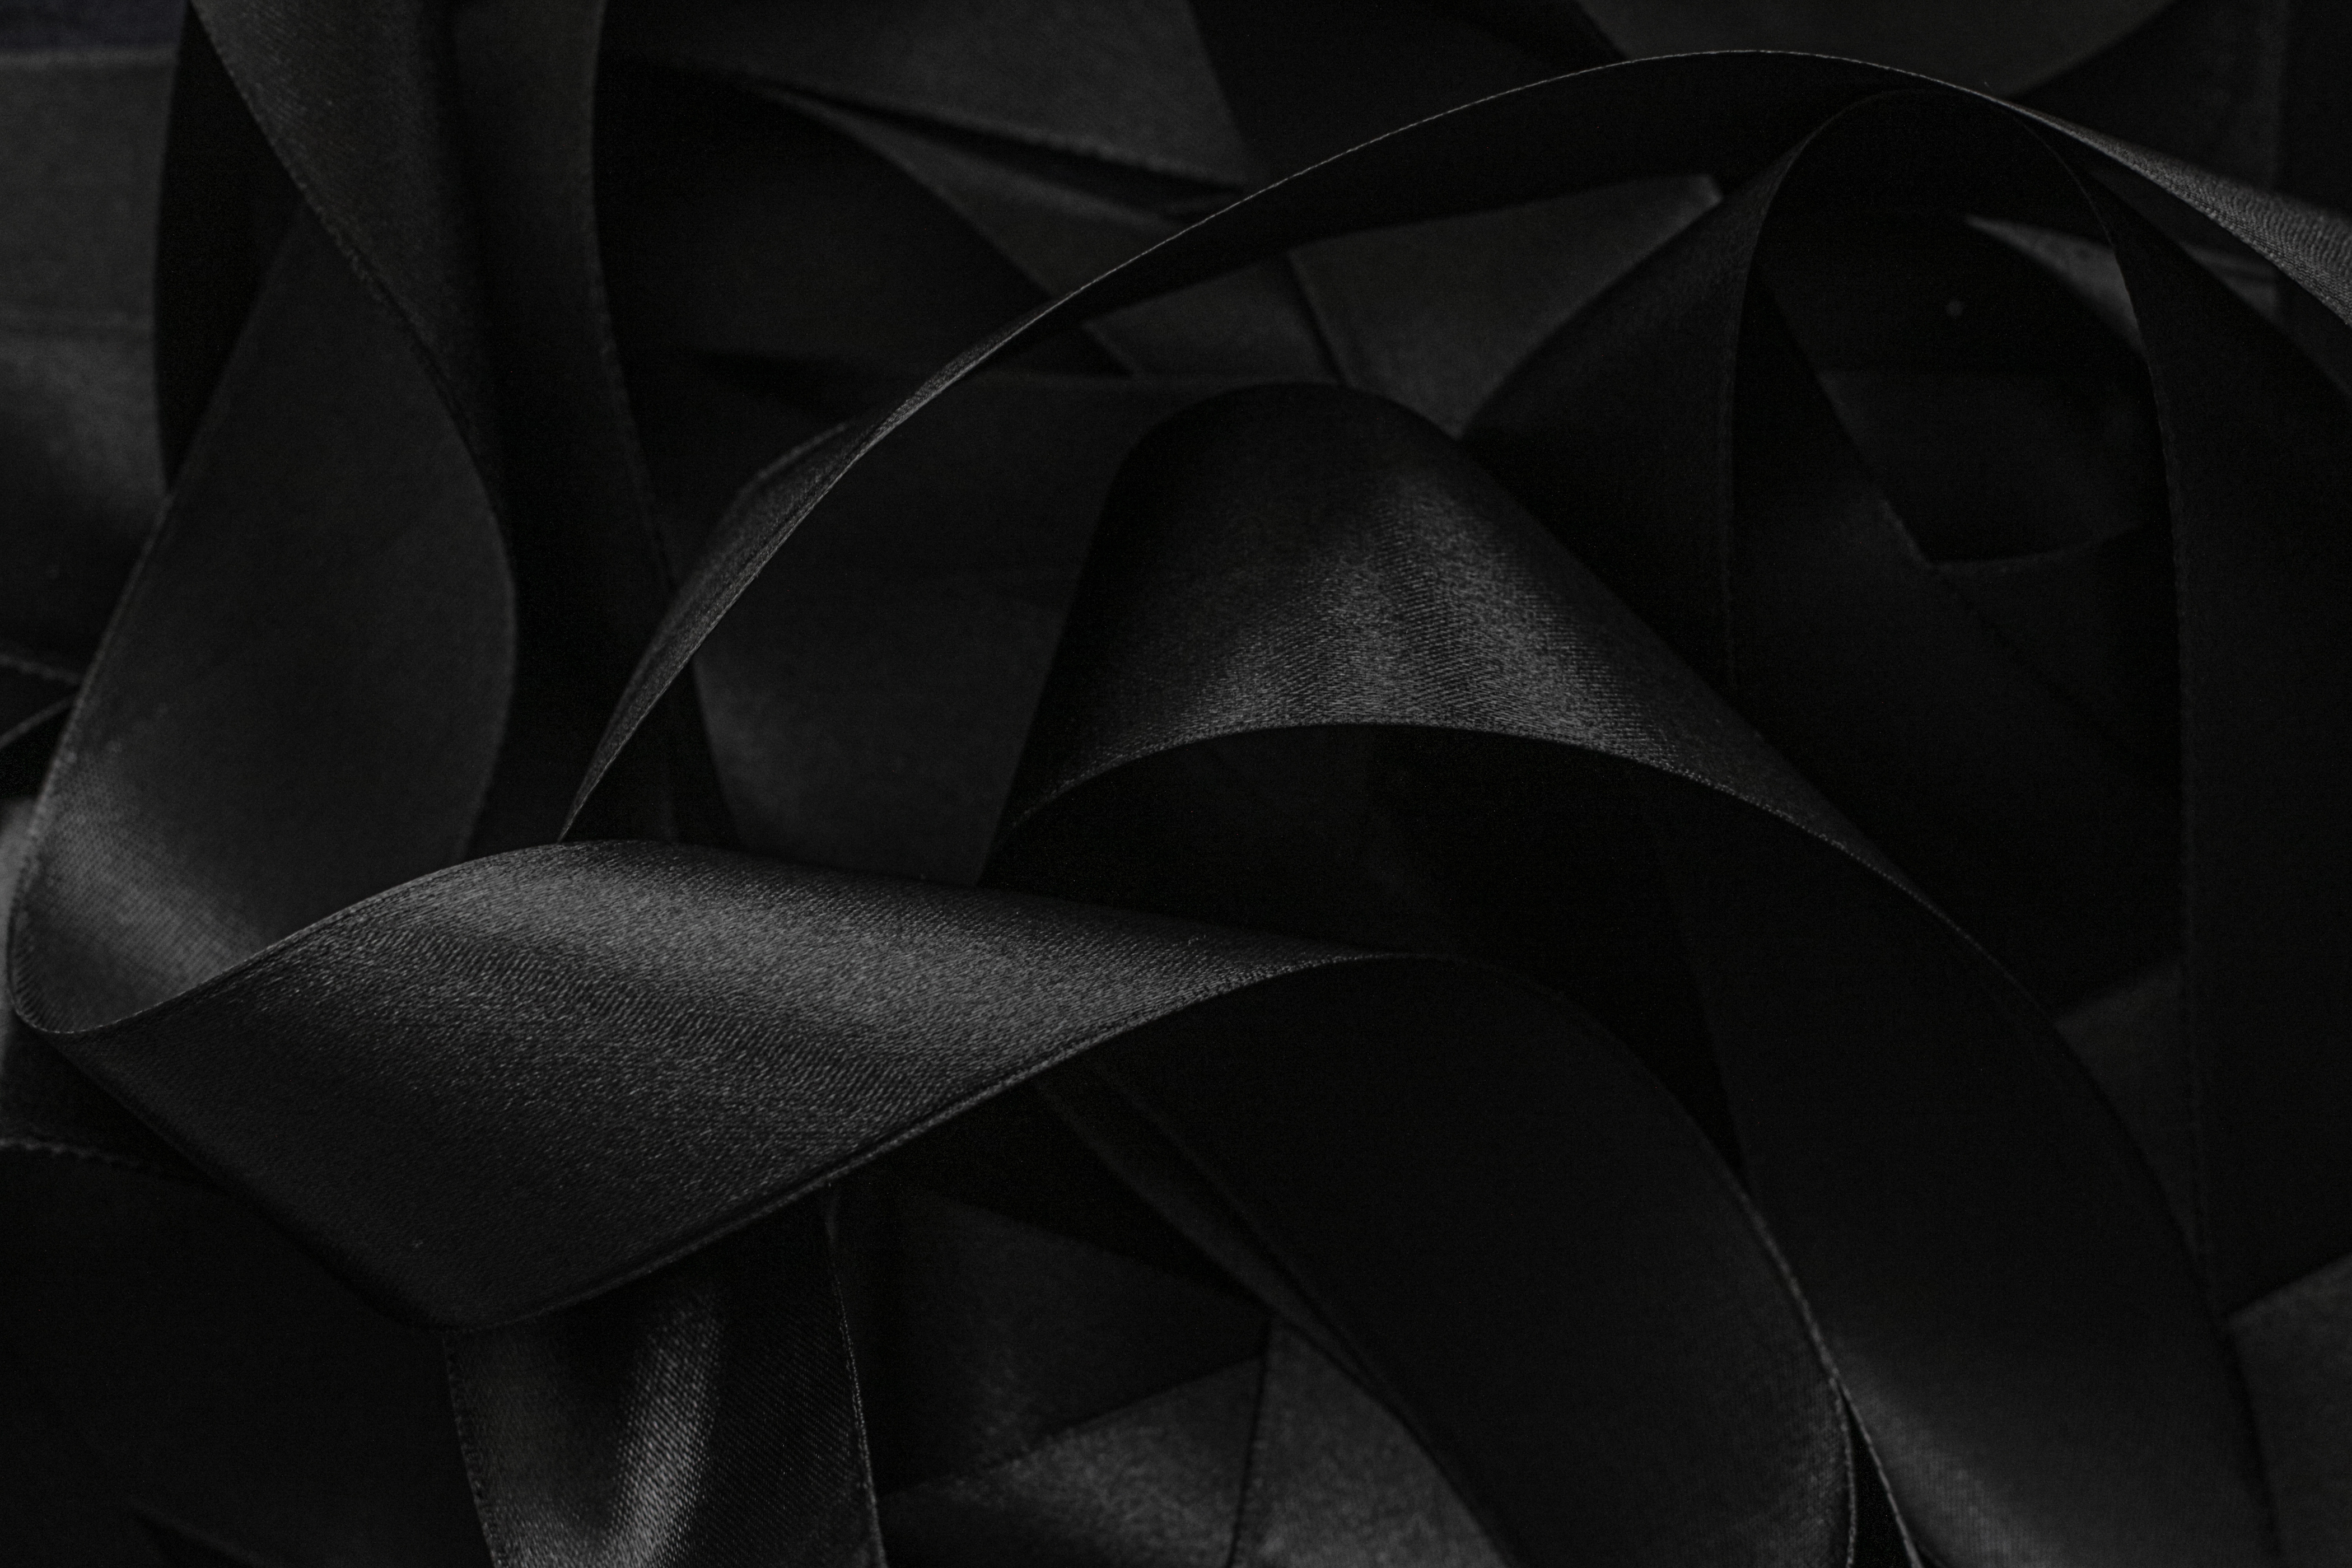 Black Silk Ribbon as Background, Abstract and Luxury Brand Design